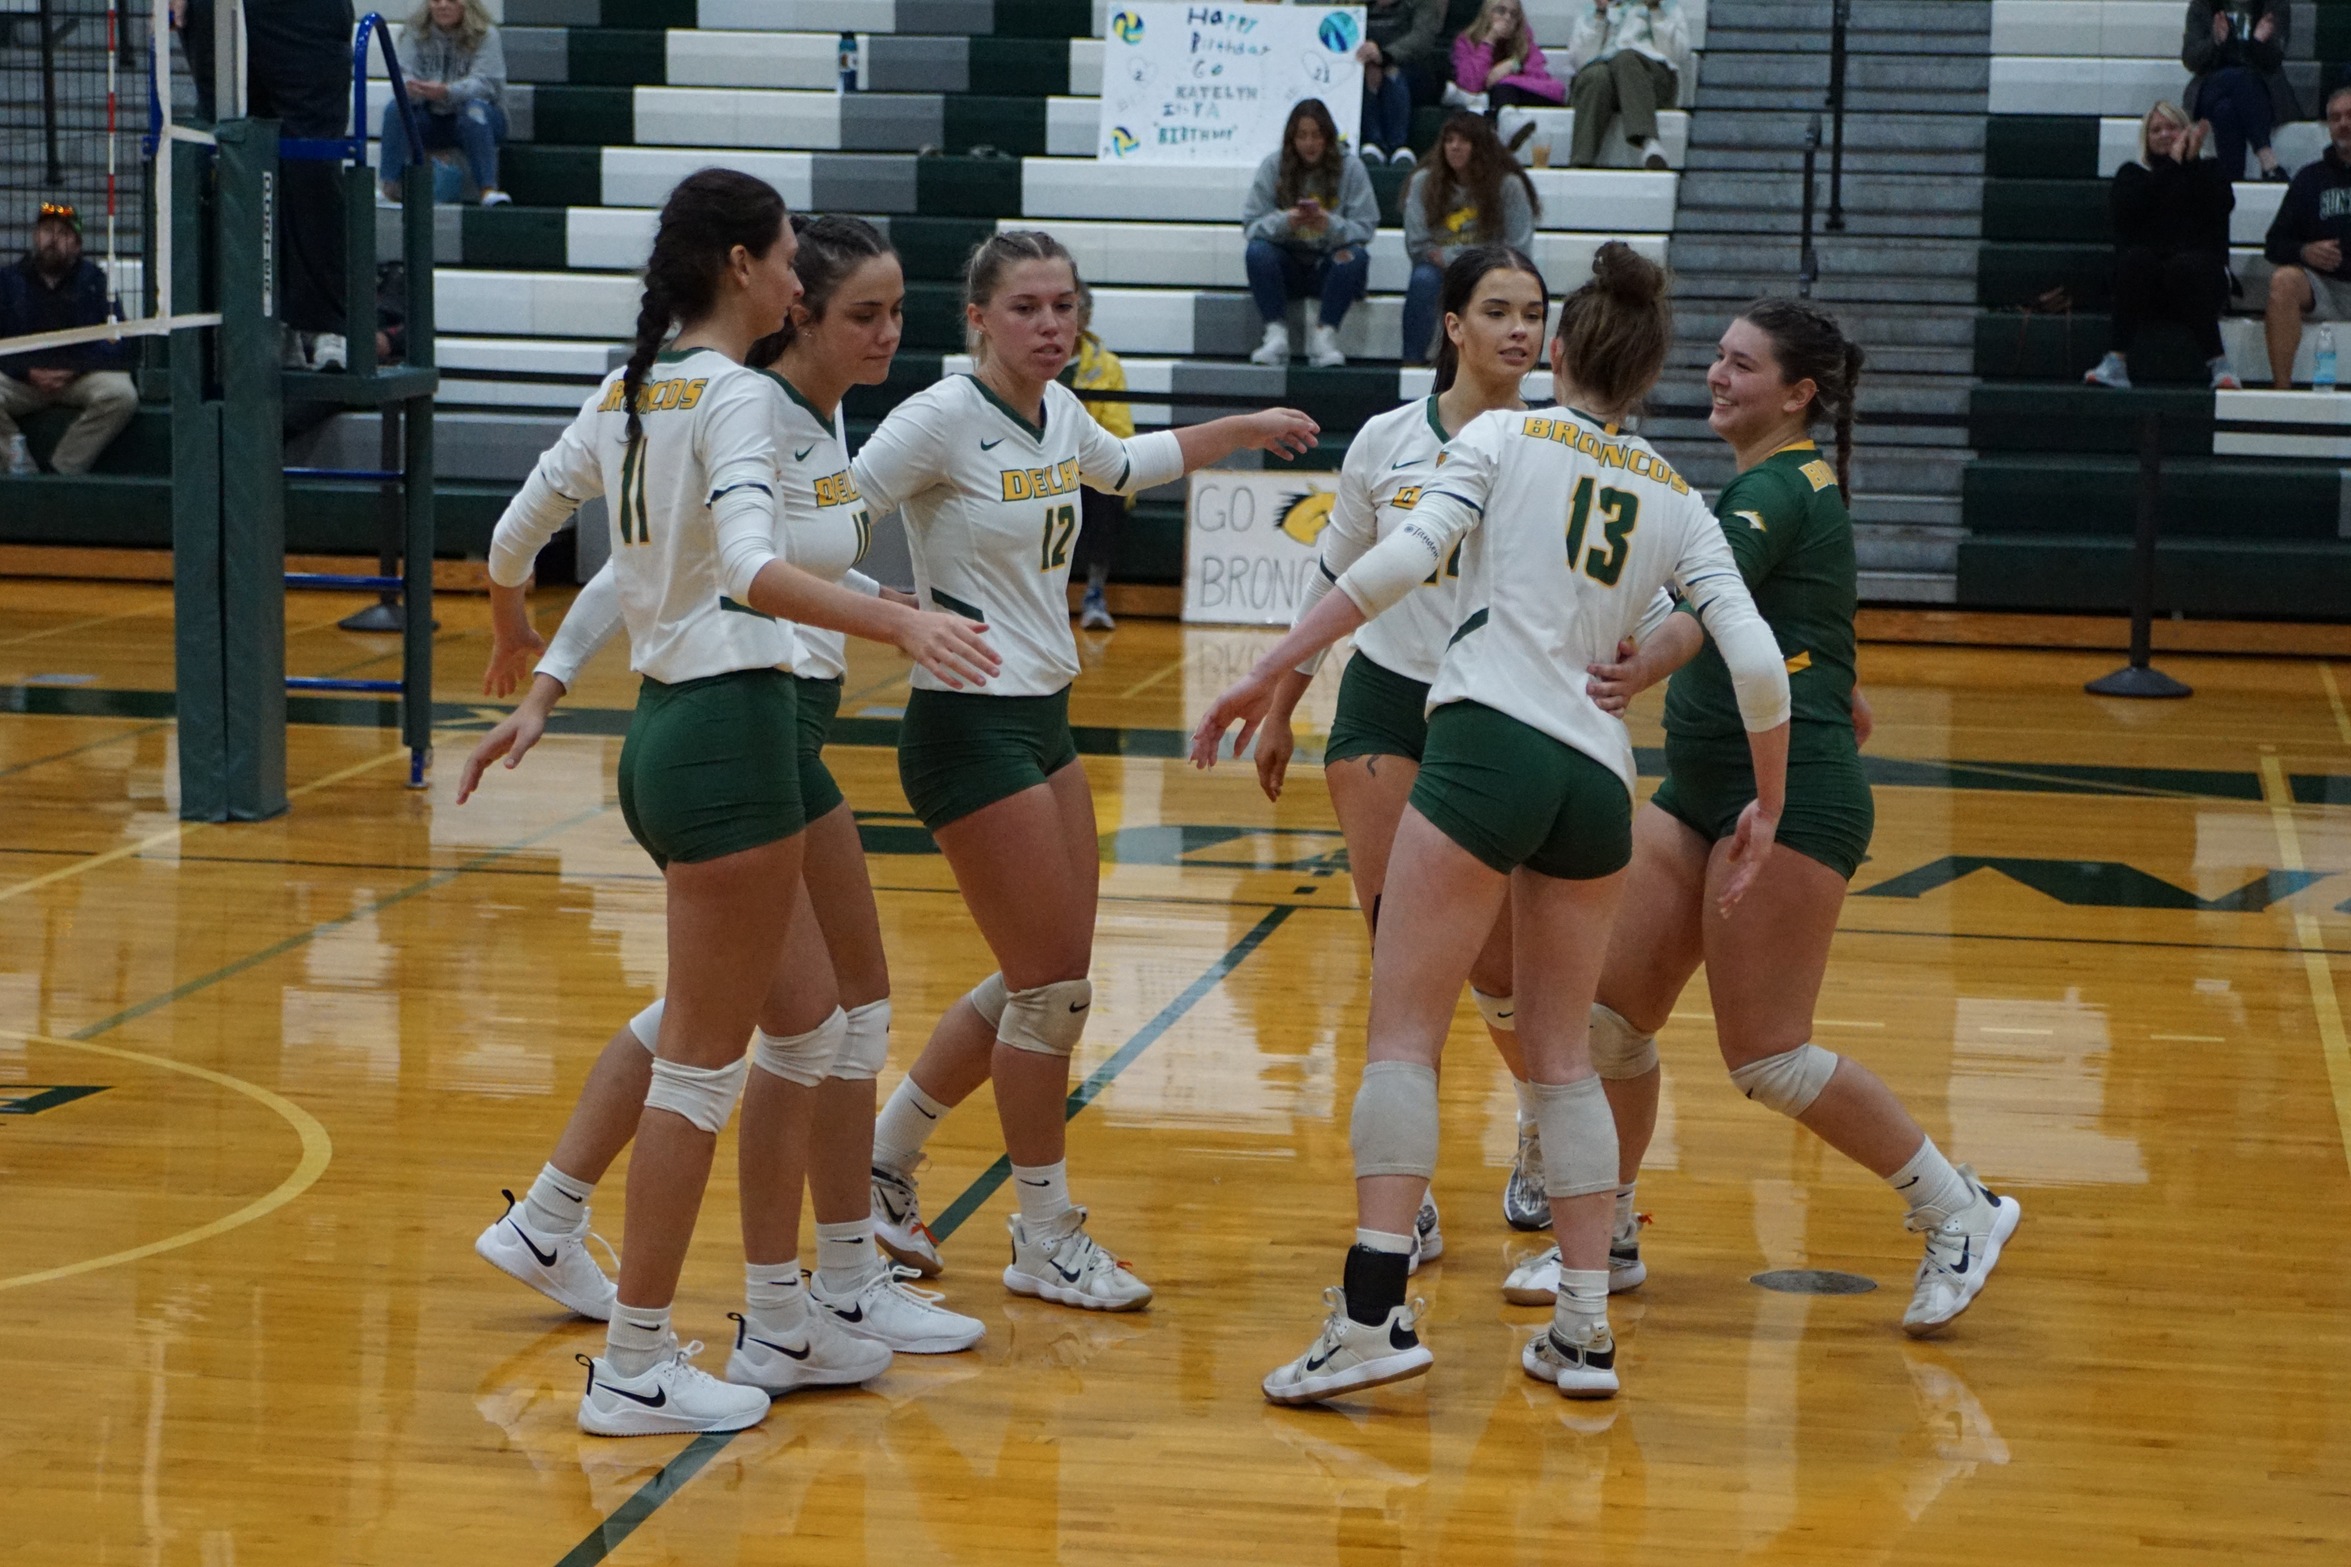 Delhi secures four set win over SUNY Cobleskill at home